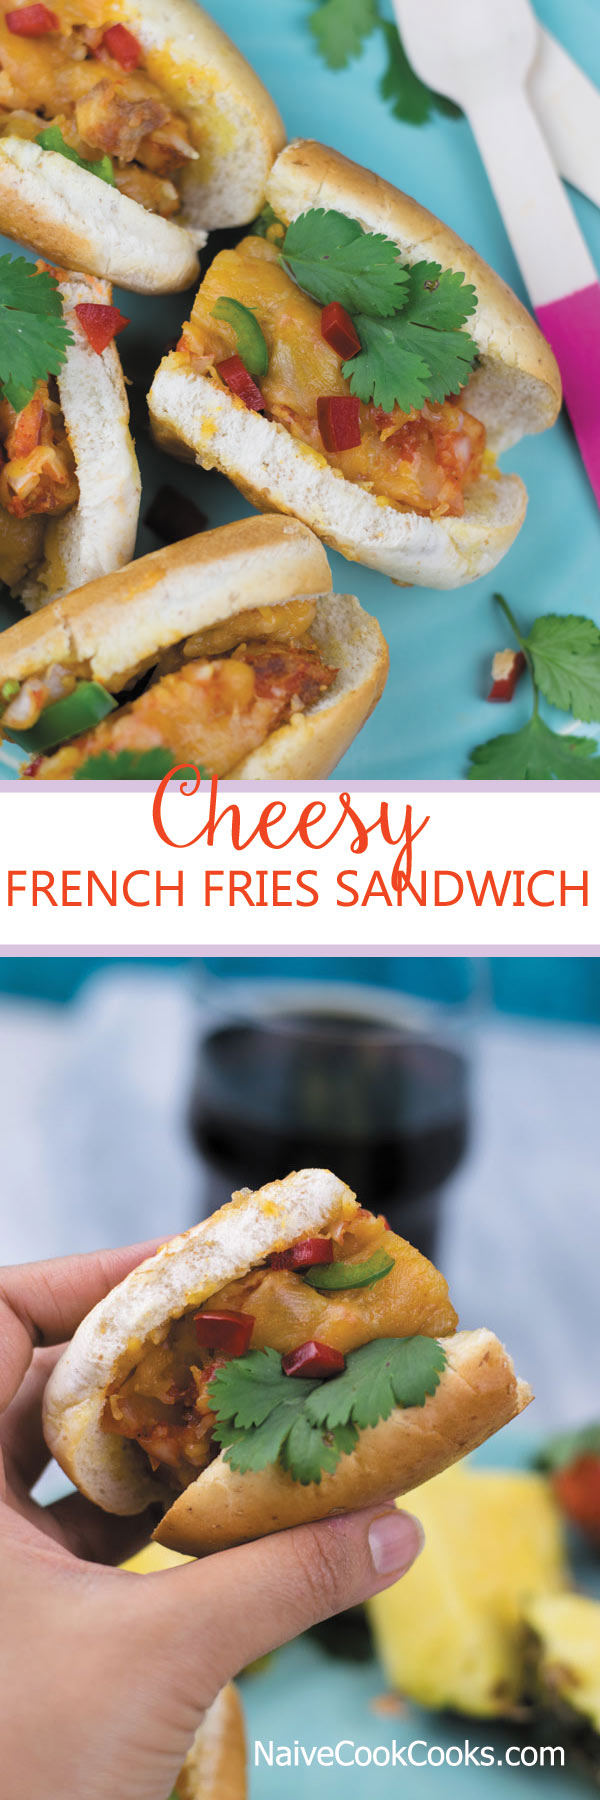 Cheesy French Fries Sandwich | NaiveCookCooks.com